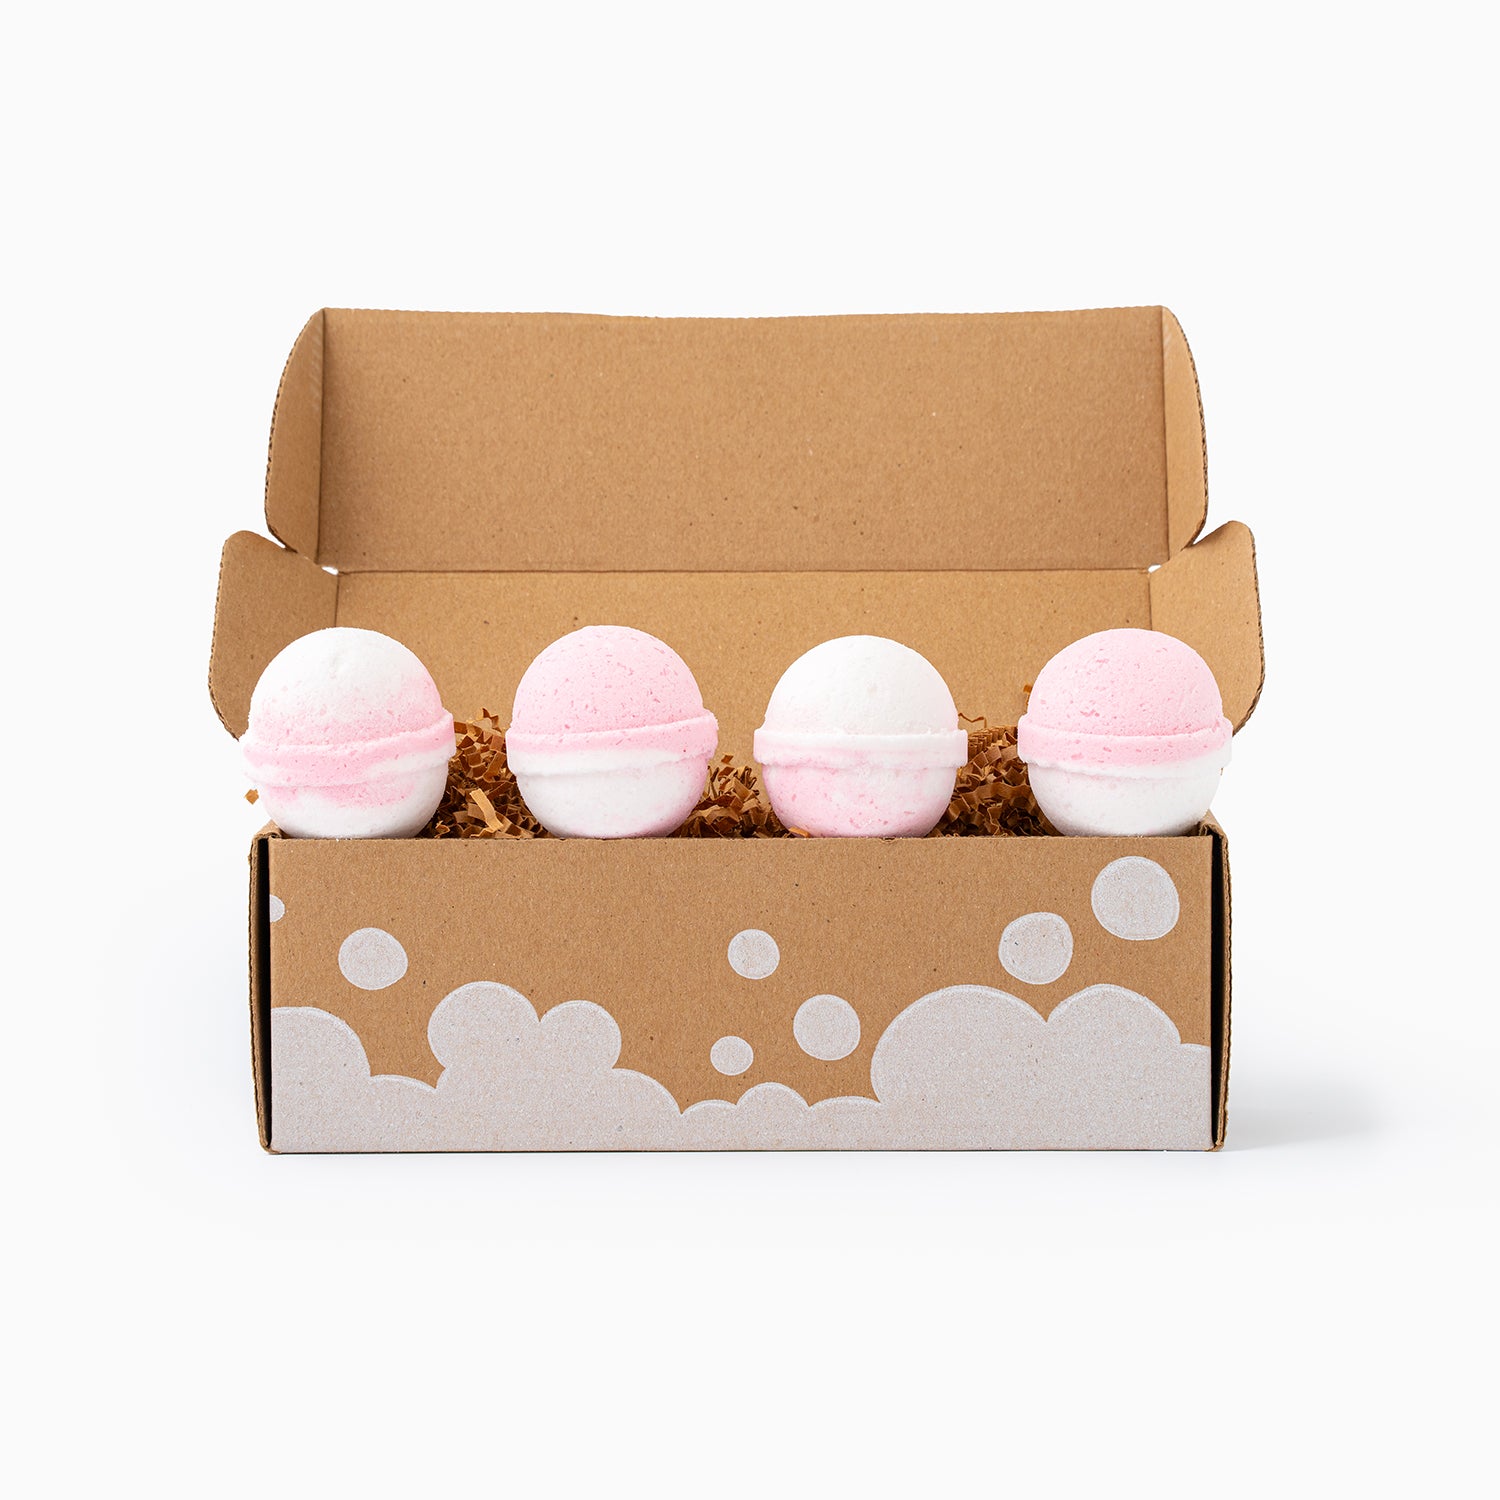 Spring Bath Bomb bundle box is standing on the white background.